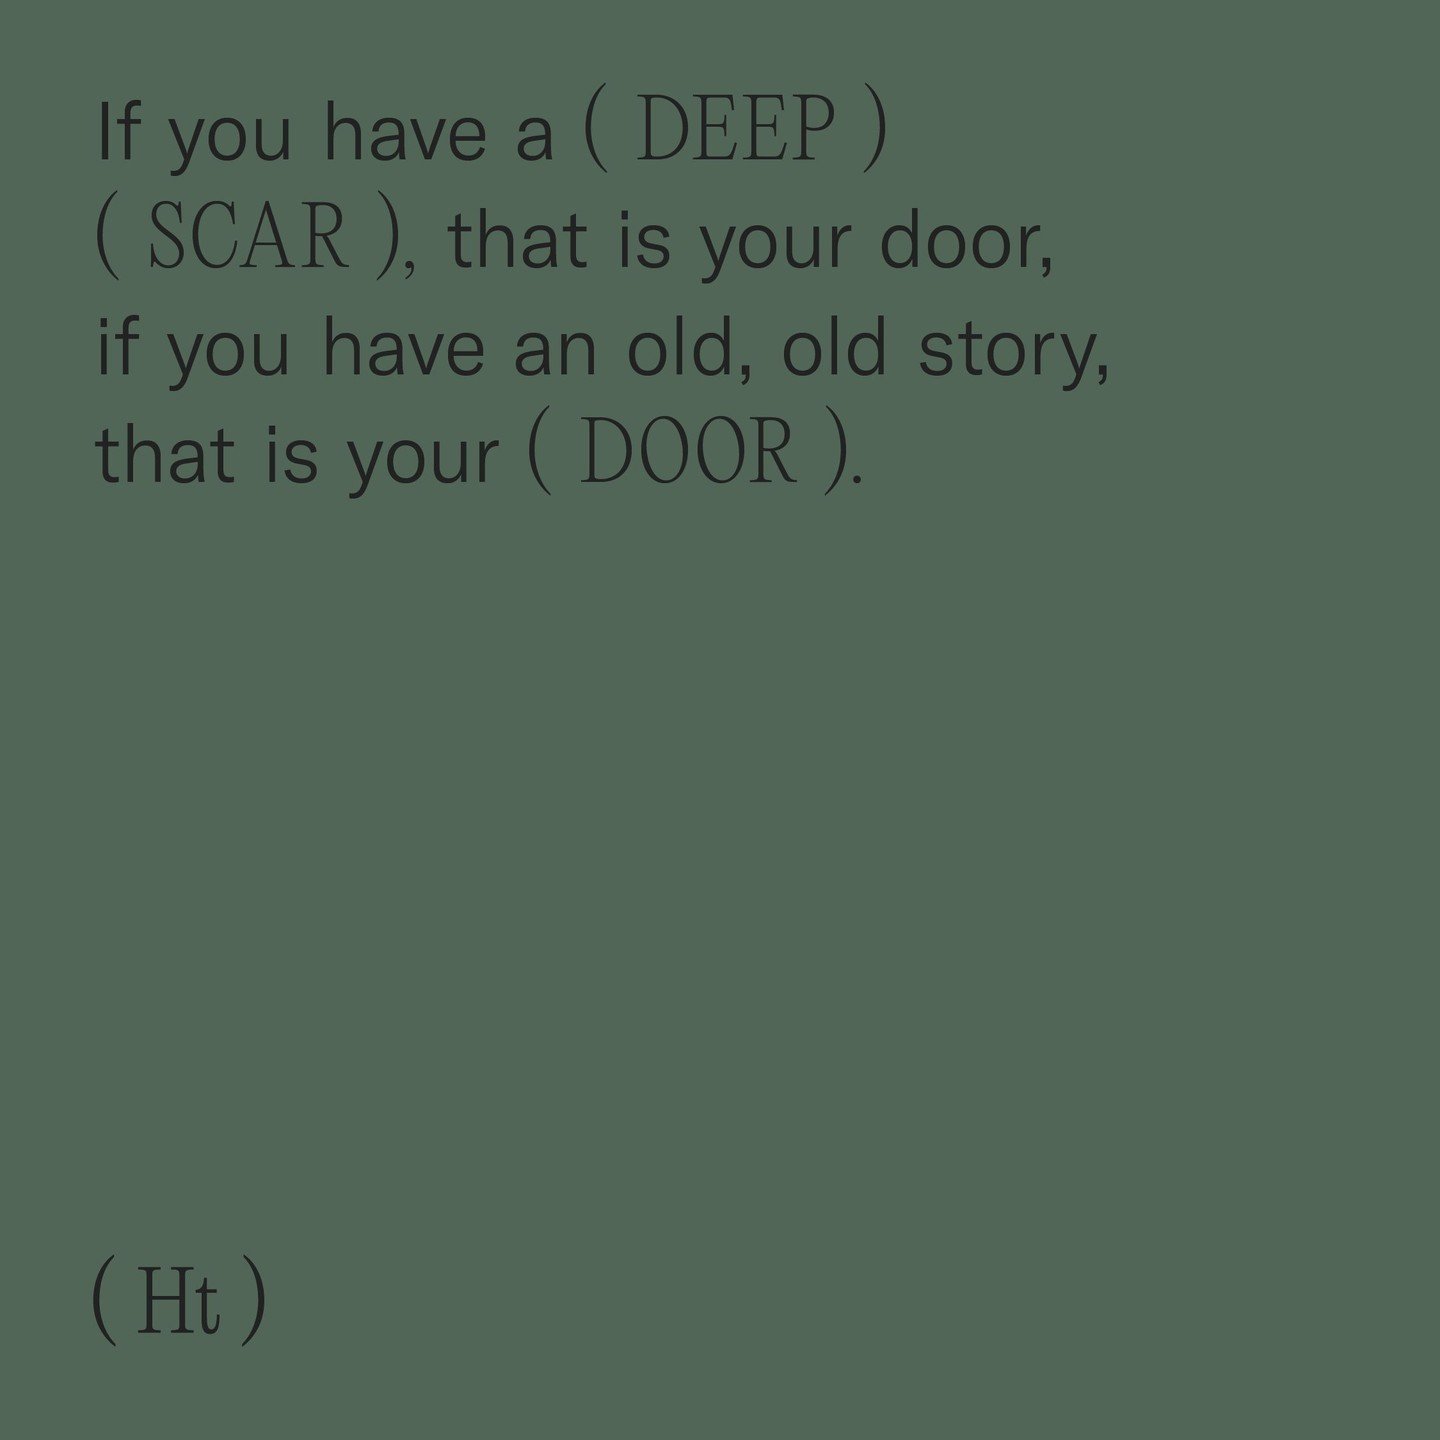 &quot;If you have a deep scar, that is your door, if you have an old, old story, that is your door.&quot; &ndash; Women Who Run With The Wolves &ndash; Author: Clarissa Pinkola Est&eacute;s 

The only way out is through &ndash; (Hue) Therapy